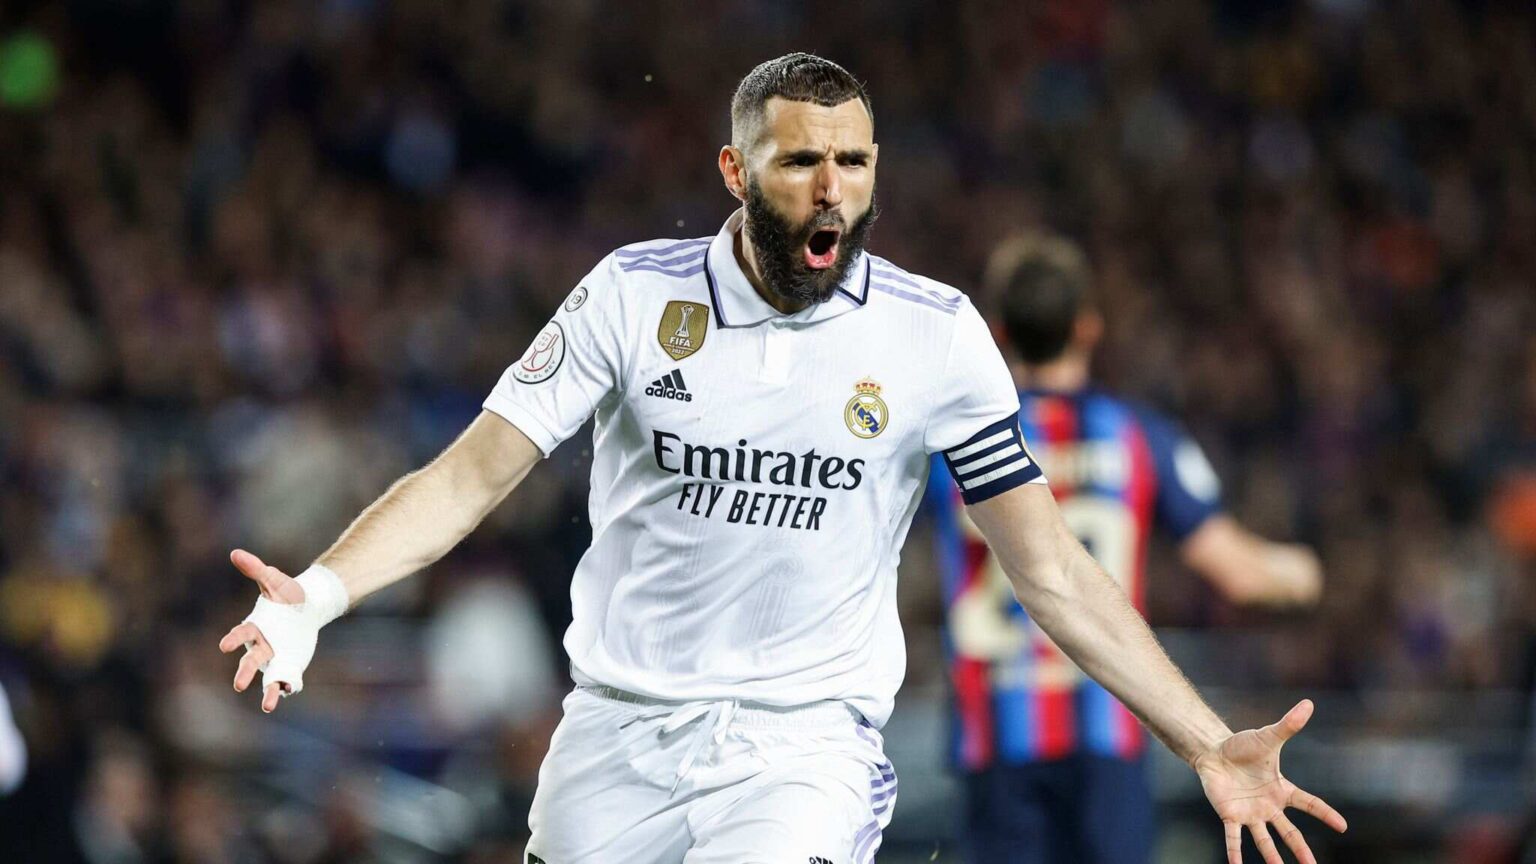 Barcelona 0-4 Real Madrid (1-4 agg) Real Madrid reach the Copa del Rey final 